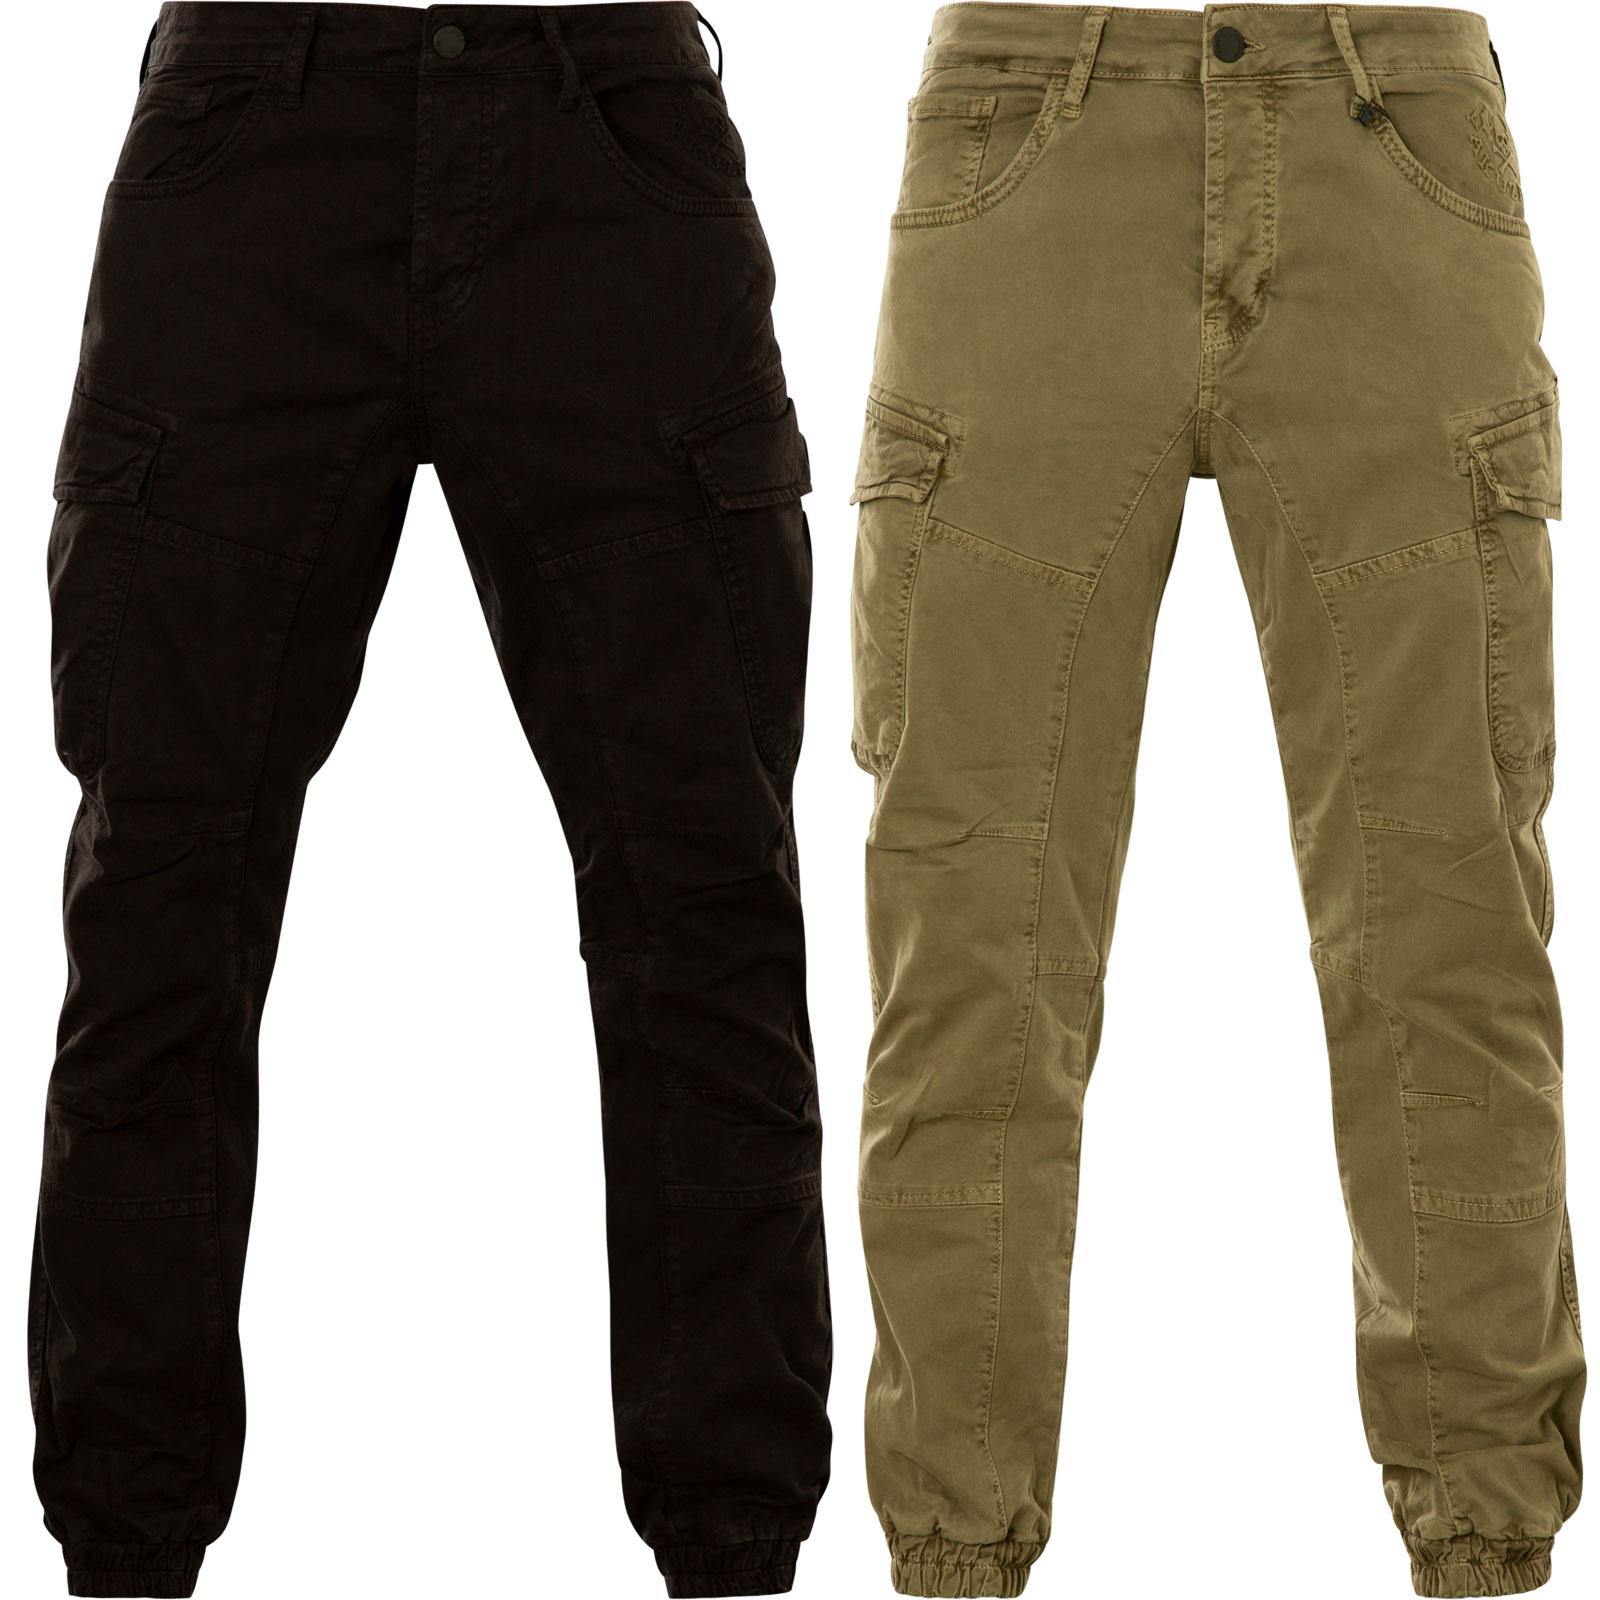 Yakuza Brass Knuckle Grip Cargo Pants CPB-21051 in black with logo embossed